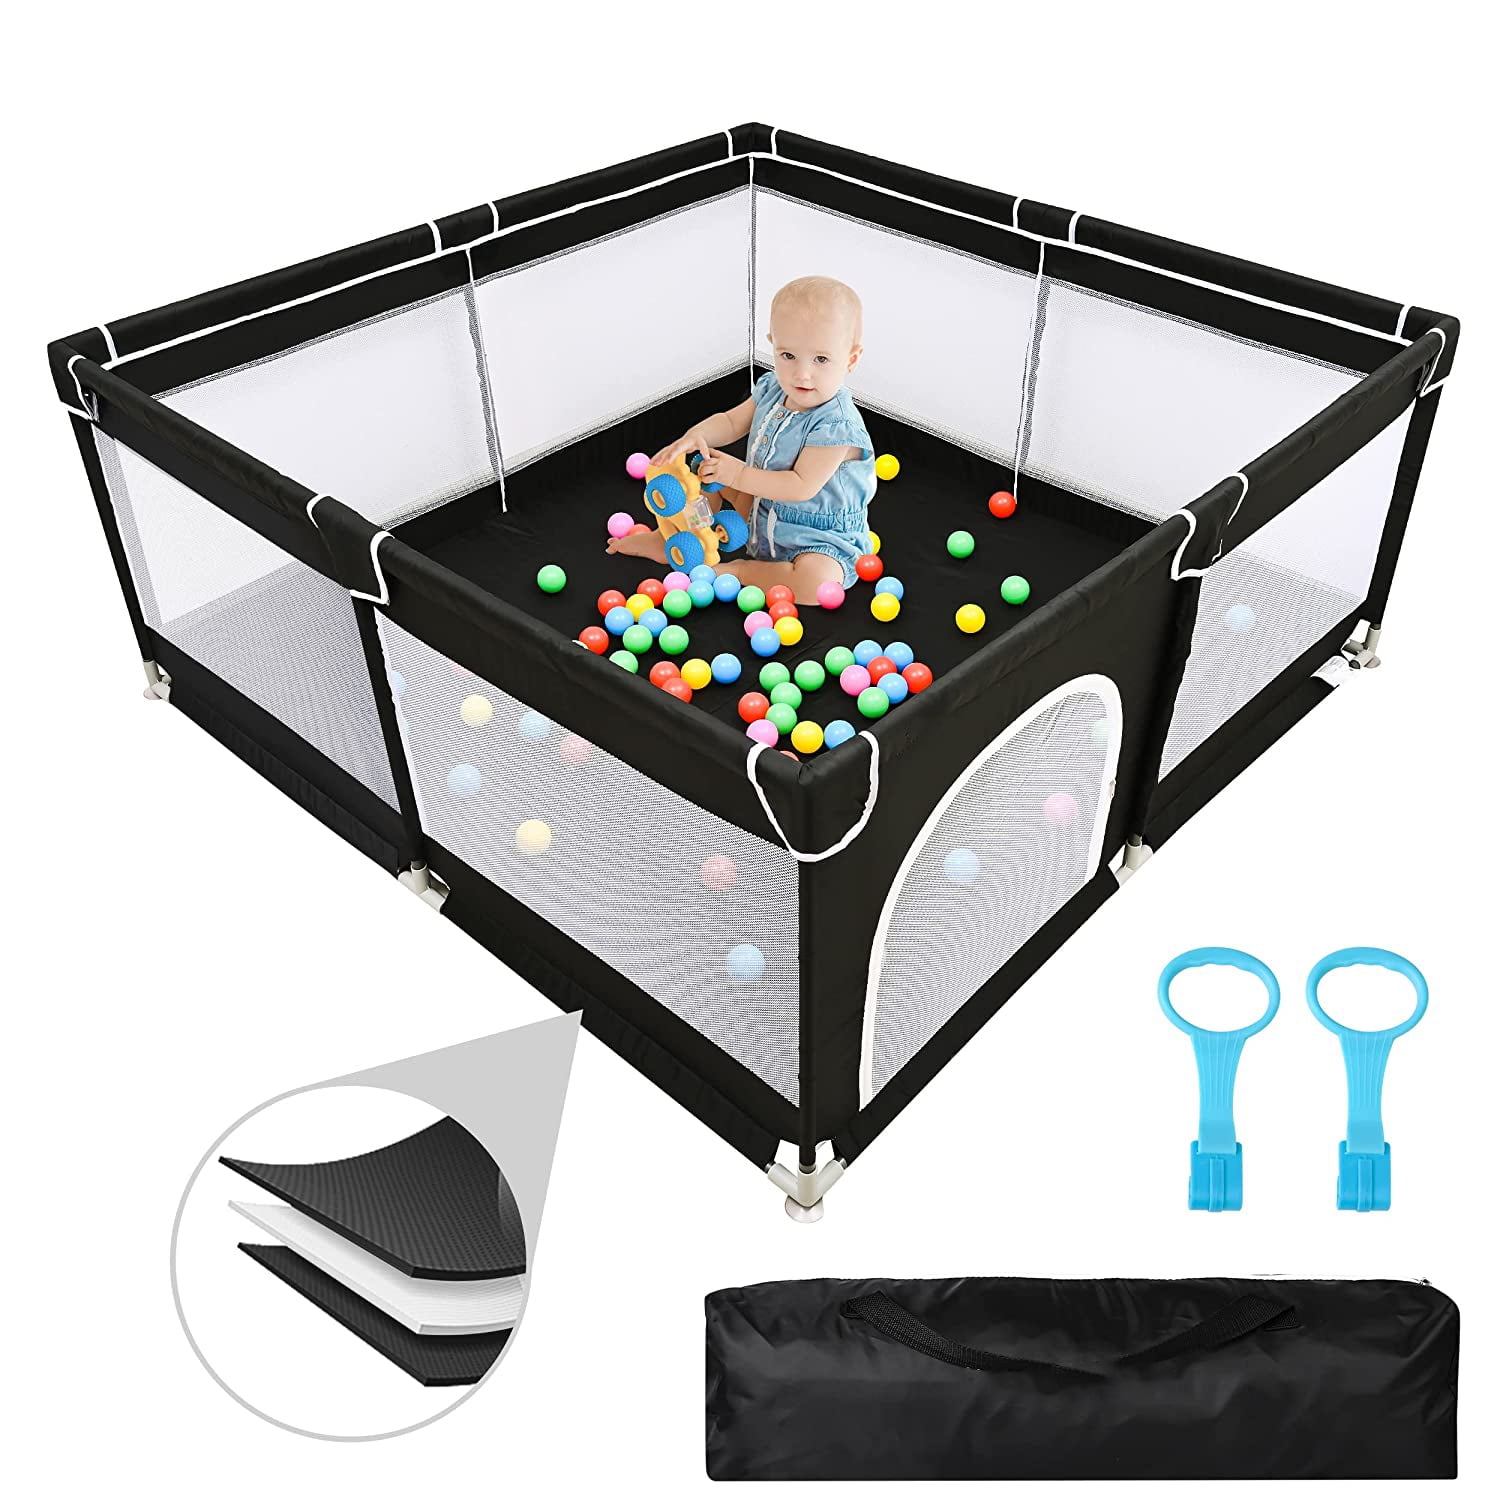 Baby Playpen Large Baby Playard Sturdy Safety Play Yard with Soft Breathable Mesh Playpen for Babies with Gate Indoor & Outdoor Kids Activity Center 